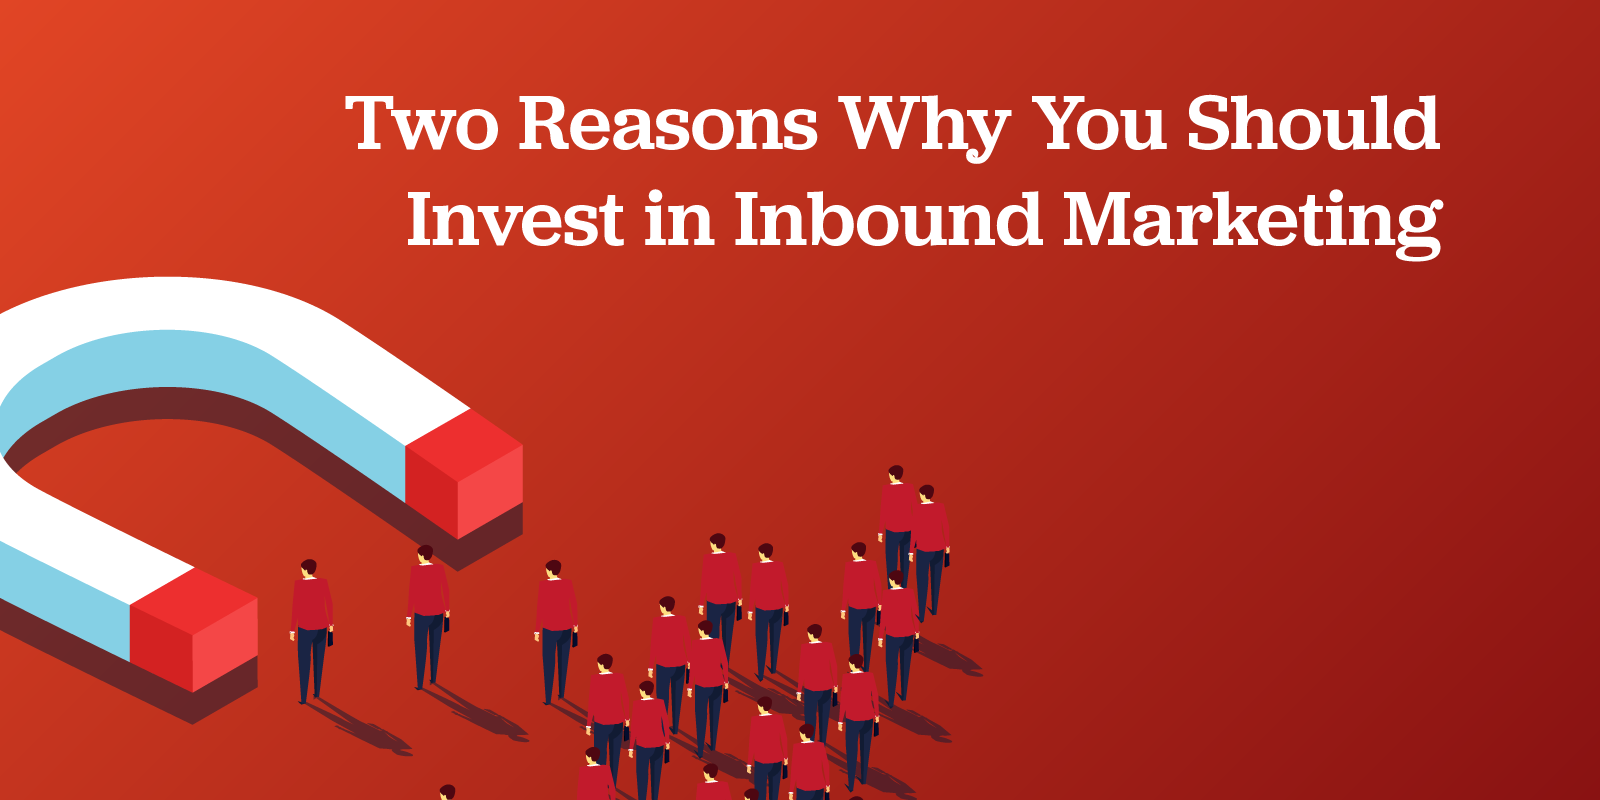 Two Reasons Why You Should Invest in Inbound Marketing featured image of a magnetic capturing sales leads